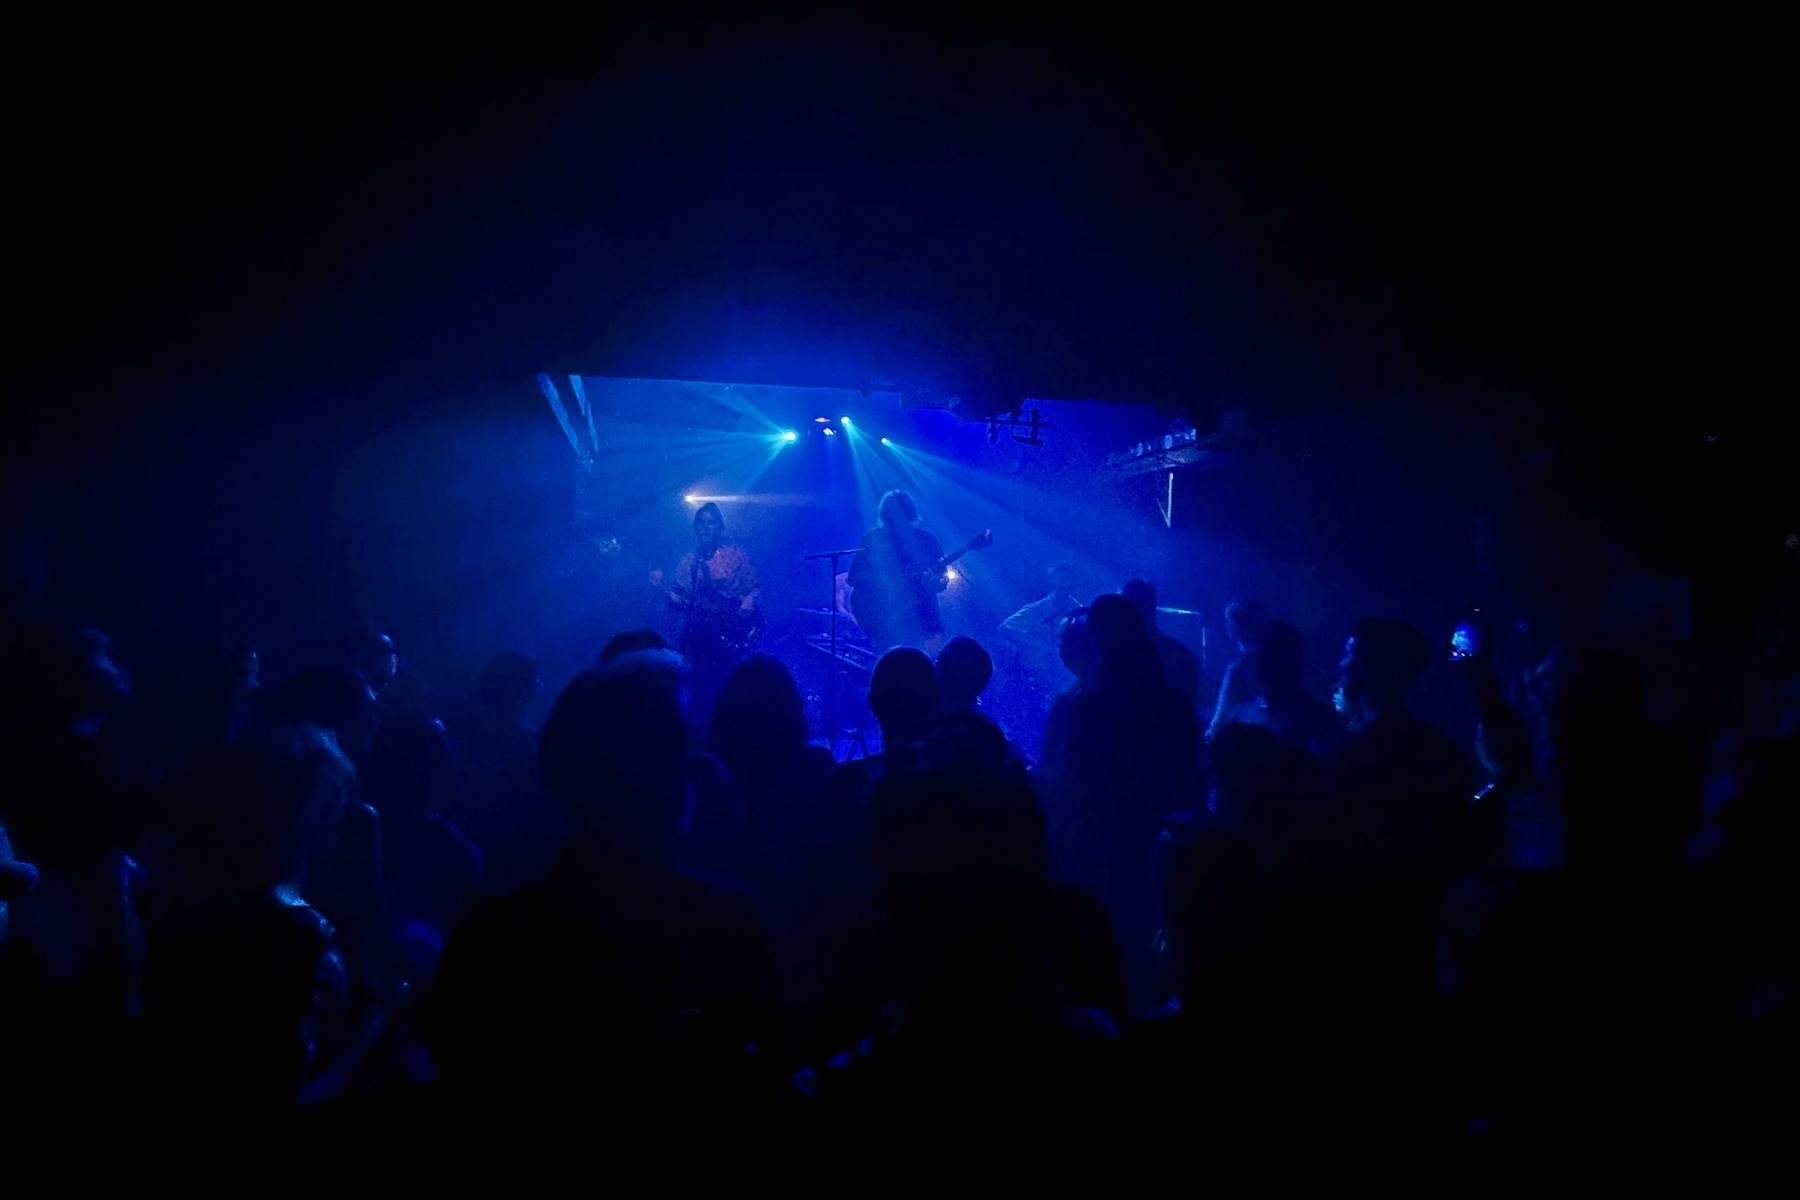 Very dark room, band playing on stage, bluish lights, but the band is barely visible, crowd in front as black shapes